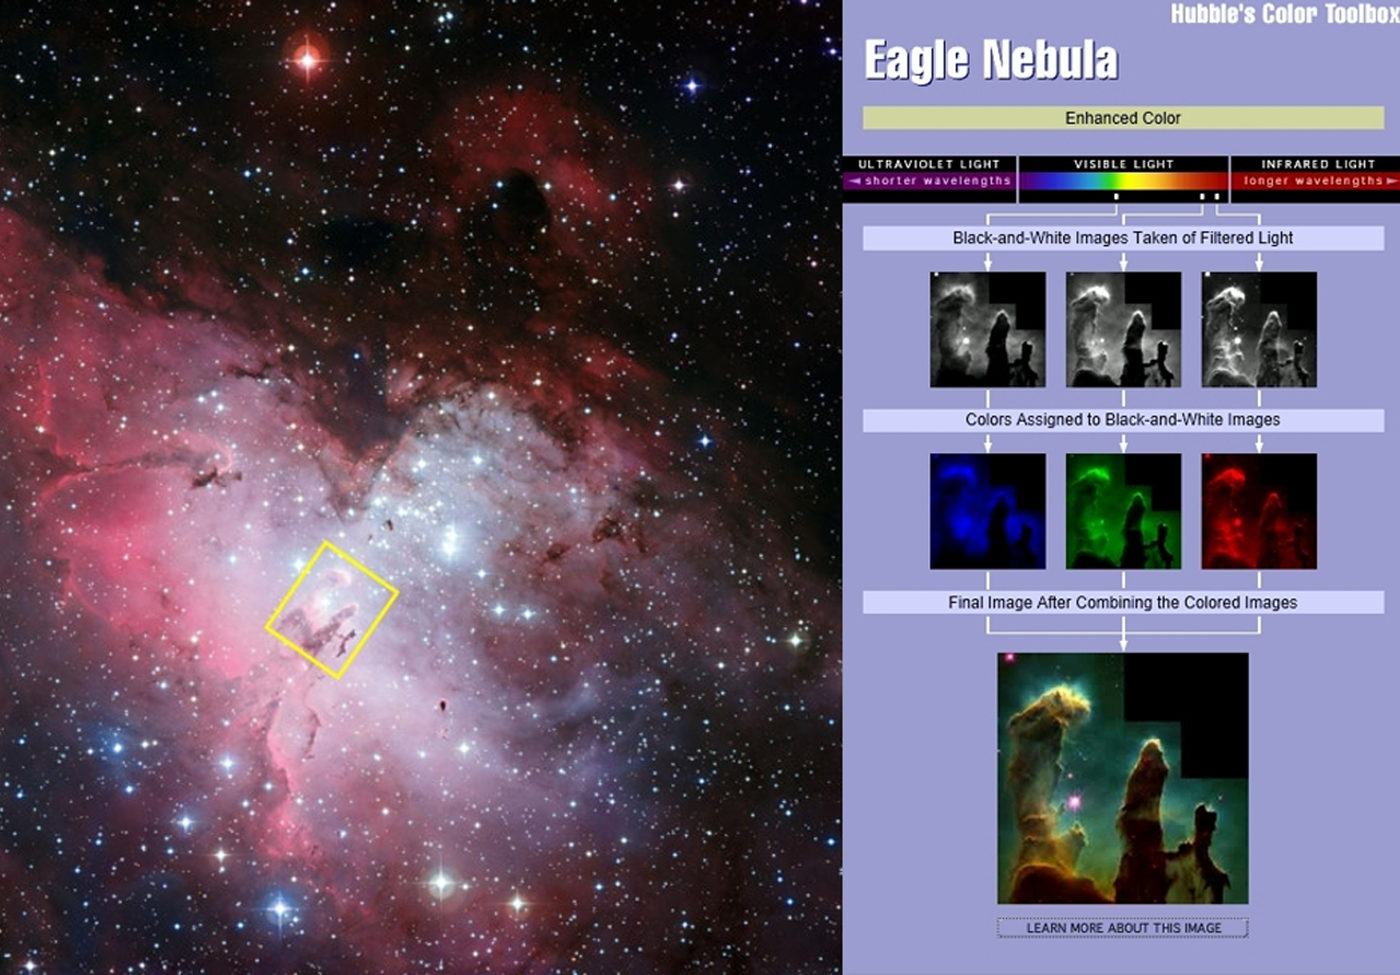 Two views of the Eagle Nebula in visible light. Left image credit: ESA/La Silla Observatory. Right image credit: NASA/Hubble.